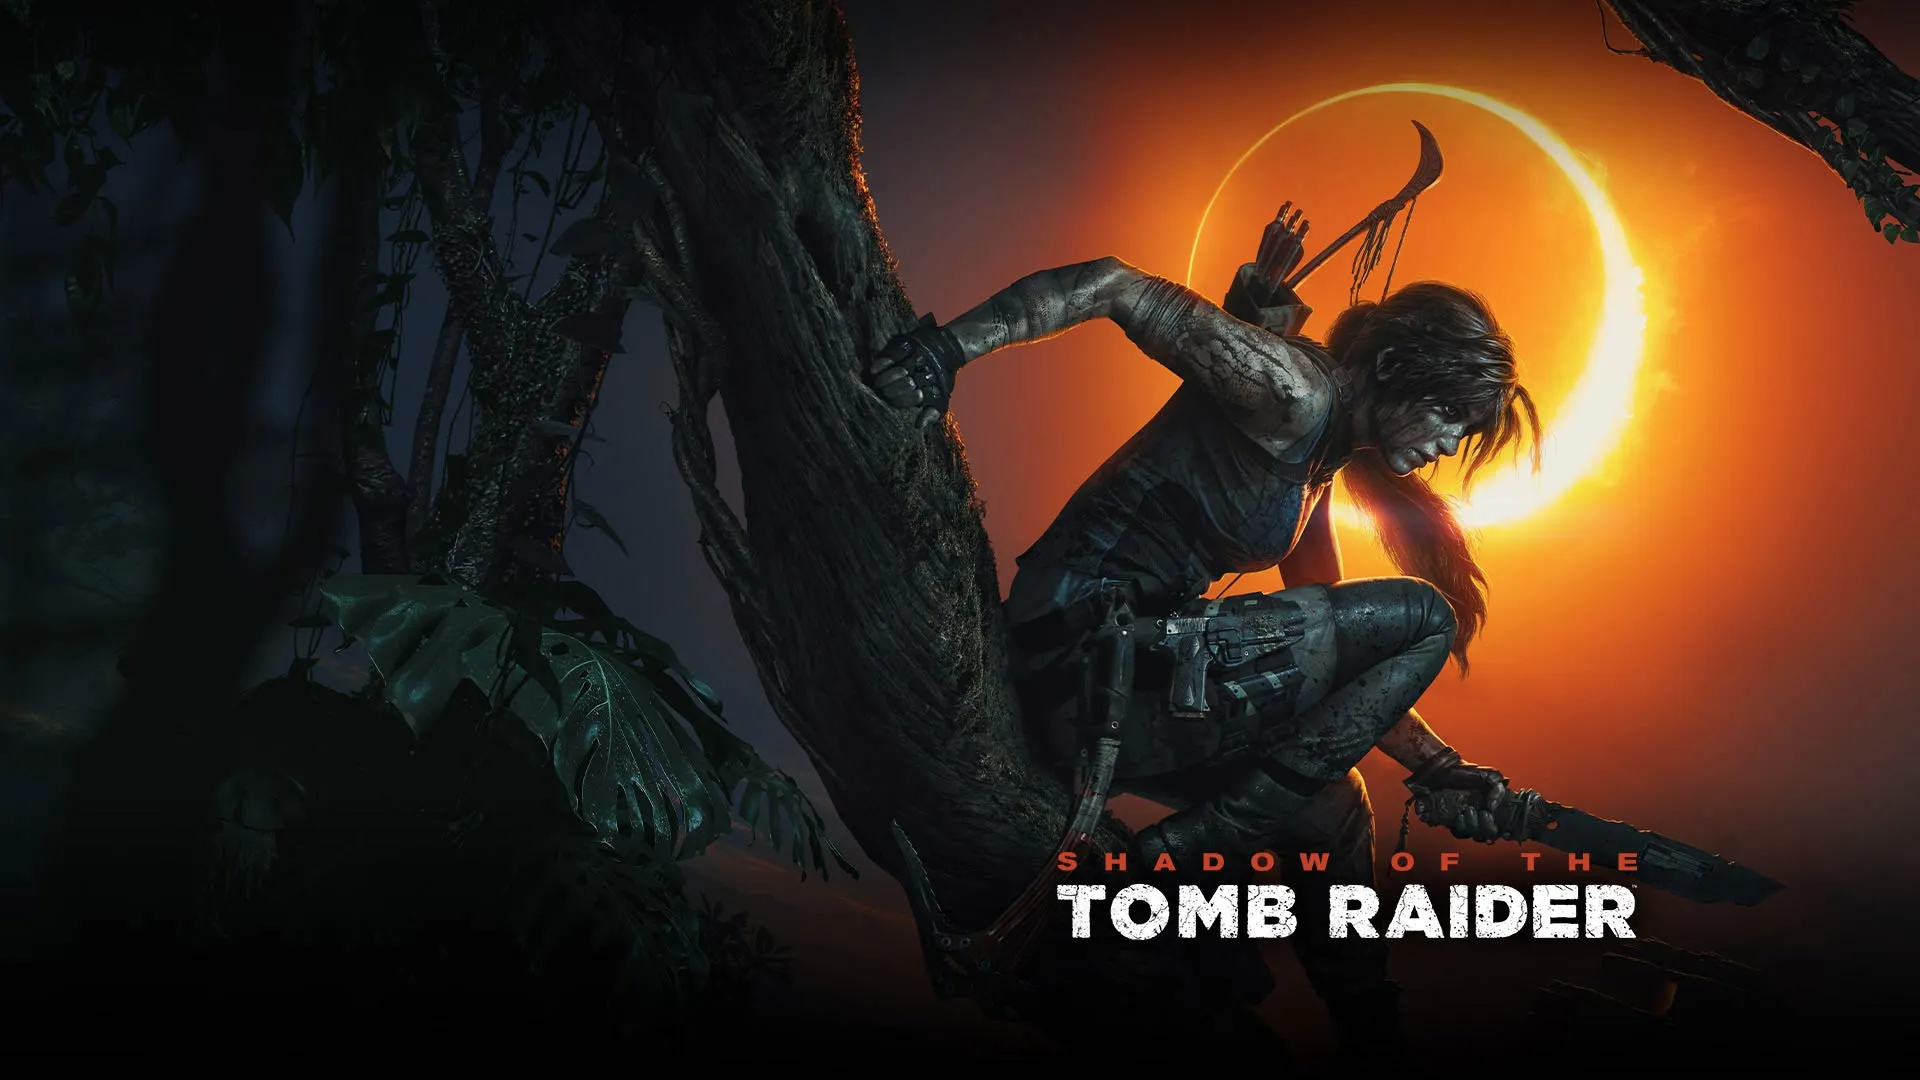 Shadow of the Tomb Raider, Submerged, Knockout City DLC free at Epic Games Store